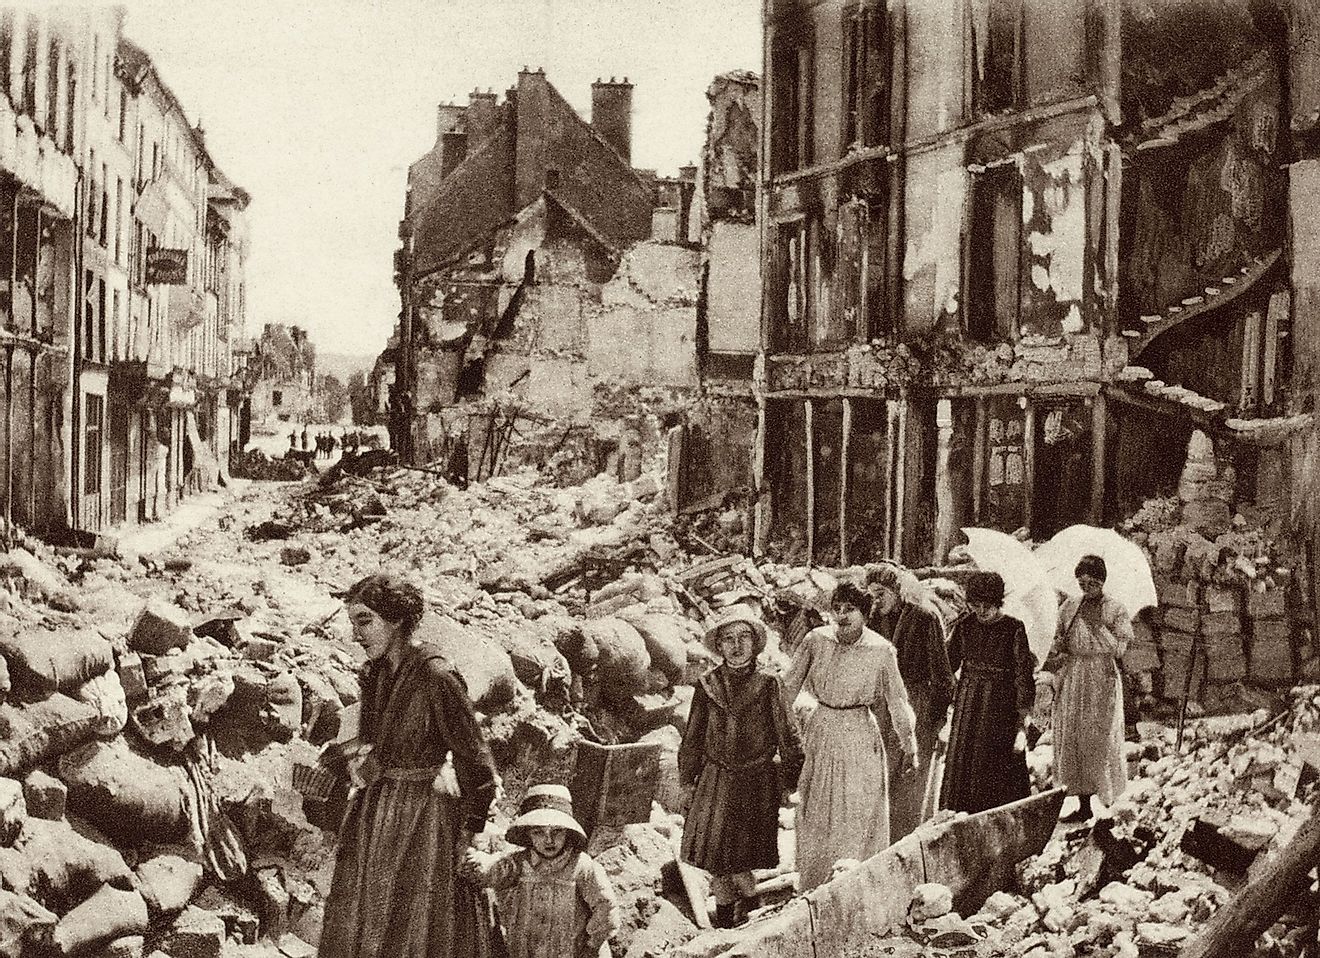 World War 1. Women and children who had been hiding in the cellars of Chateau-Thierry, France, emerging after the Allies liberated the city in July 1918. Image source: Everett Collection/Shutterstock.com